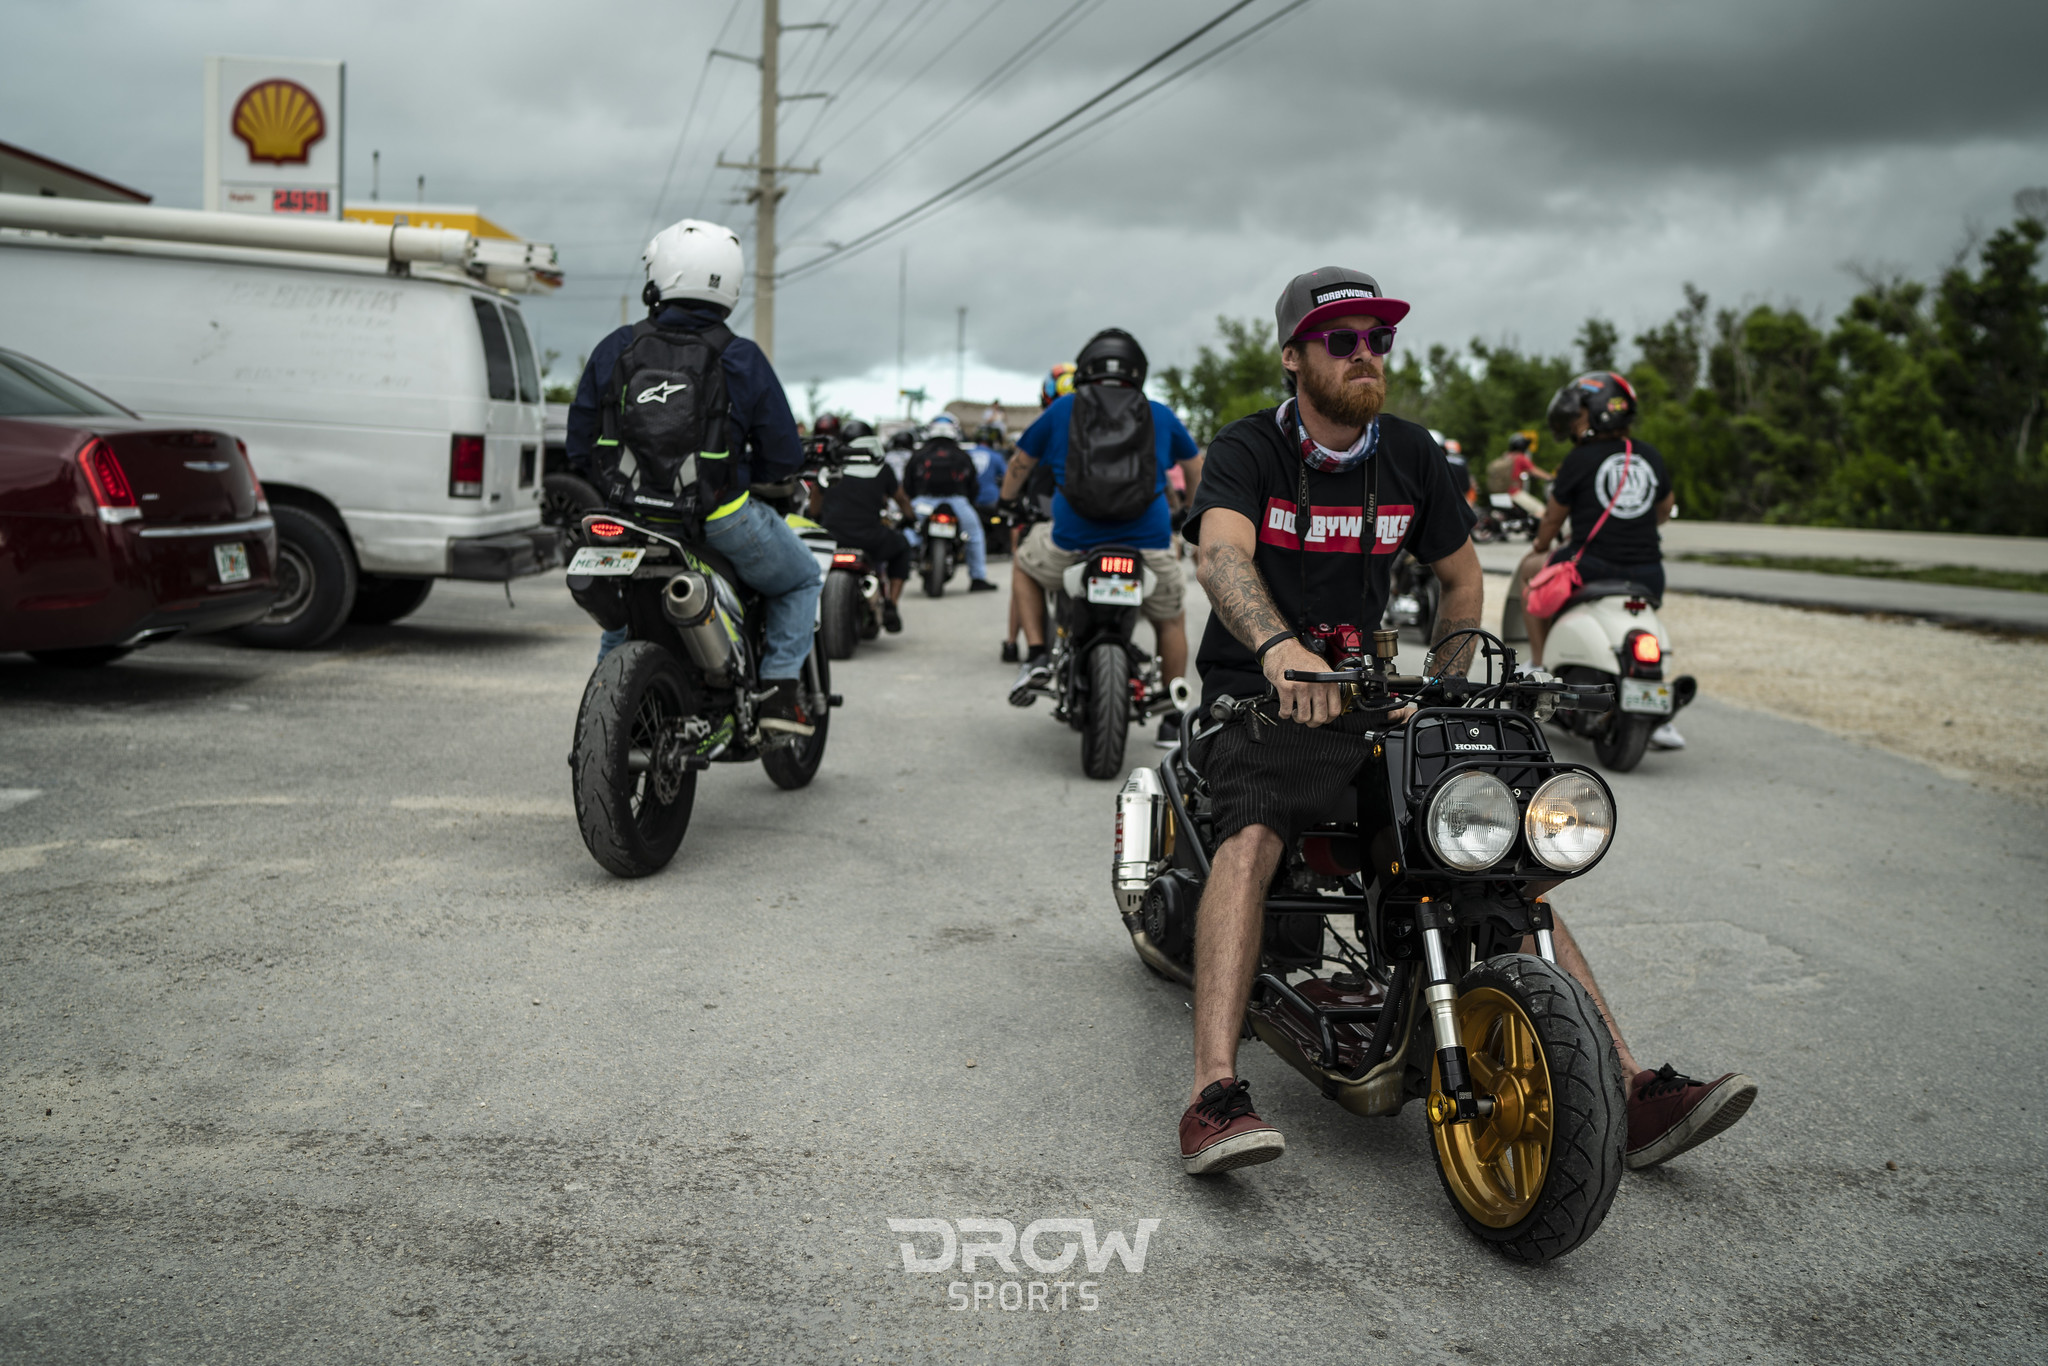 The Key West Conch Ride 2018